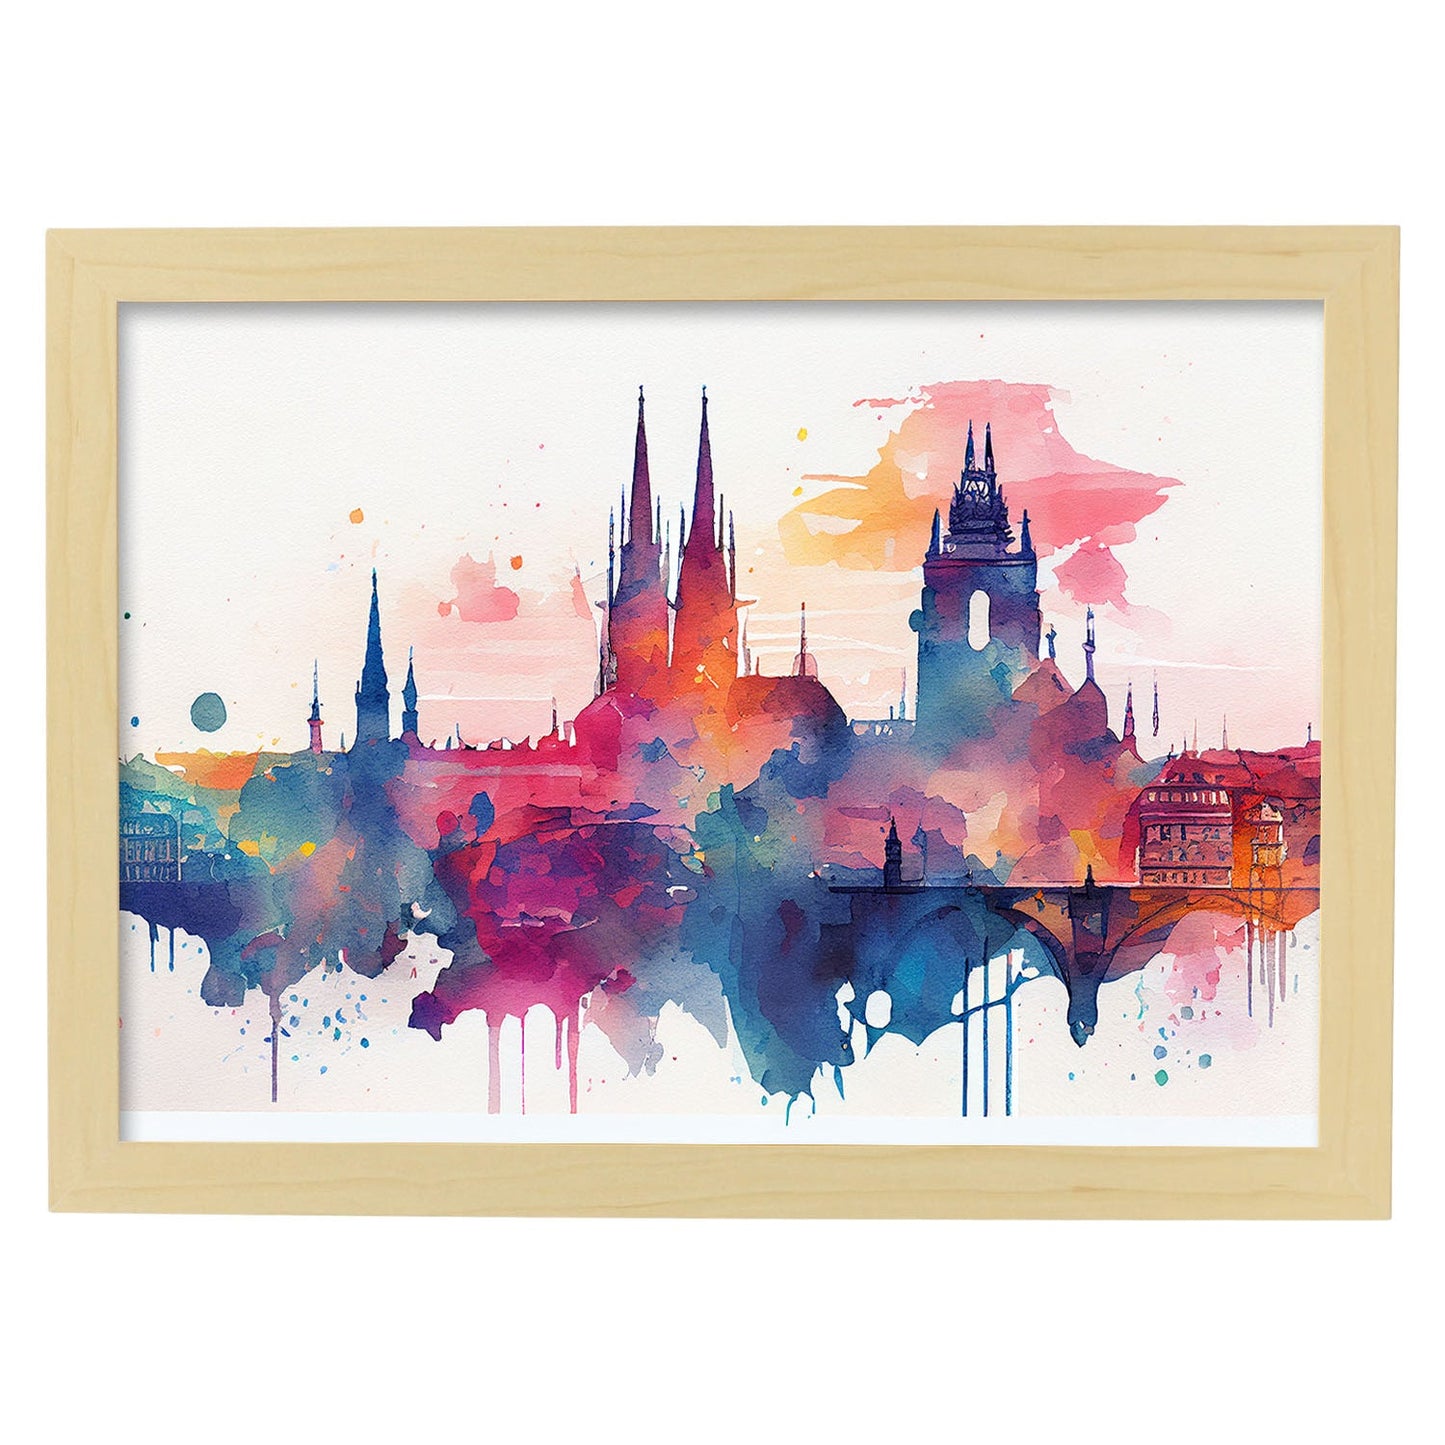 Nacnic watercolor of a skyline of the city of Prague_1. Aesthetic Wall Art Prints for Bedroom or Living Room Design.-Artwork-Nacnic-A4-Marco Madera Clara-Nacnic Estudio SL